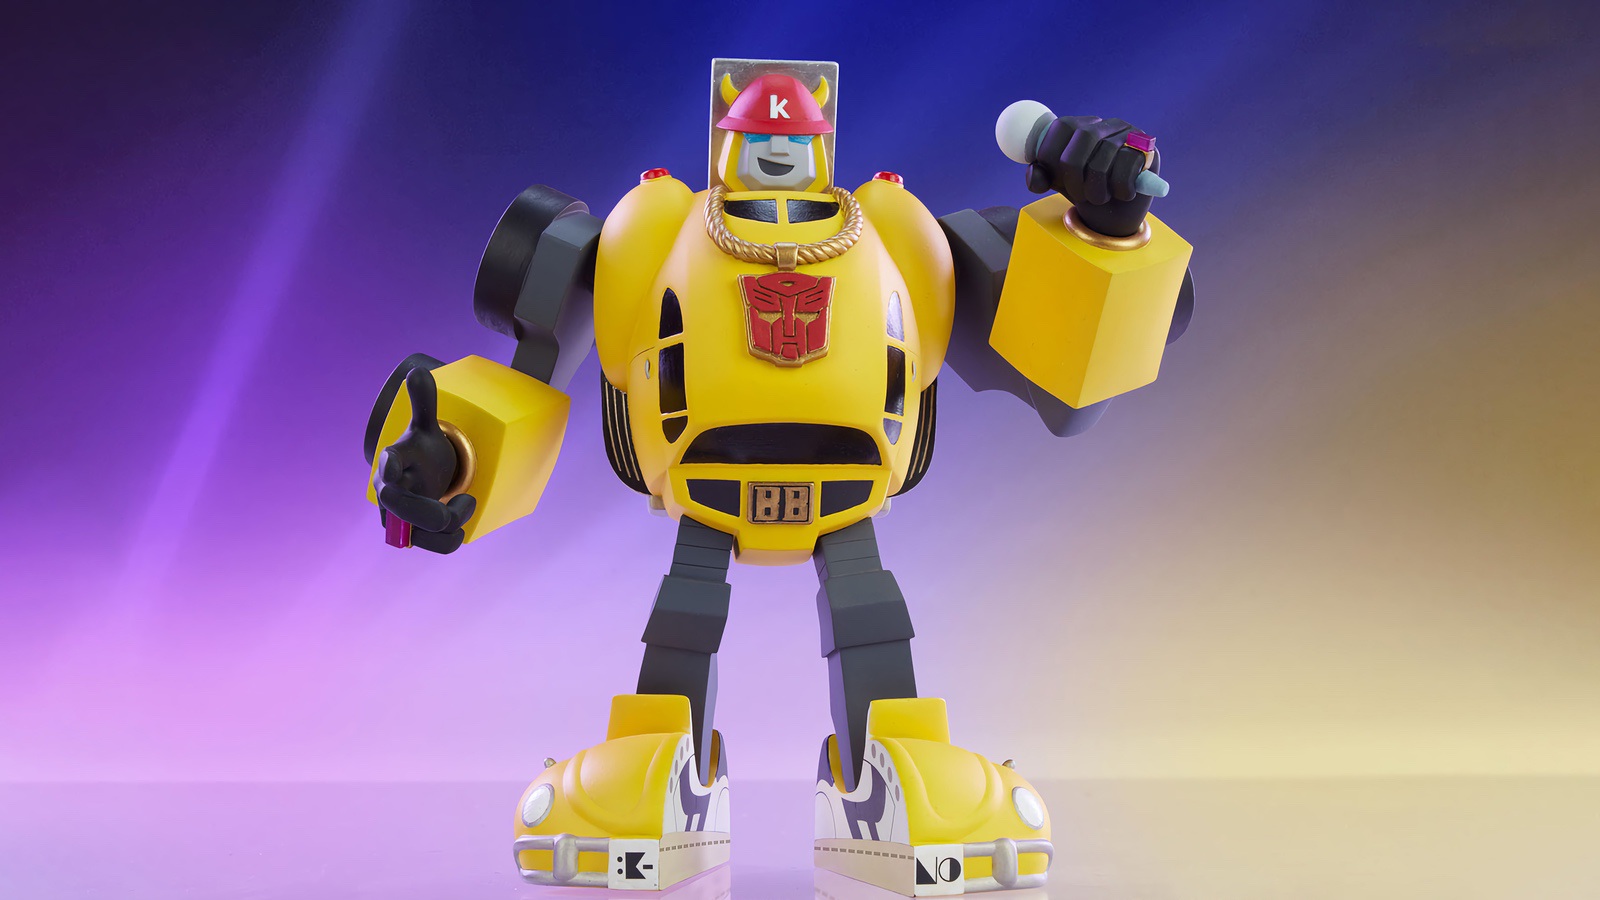 You are currently viewing Bumblebee by kaNO x Unruly Industries